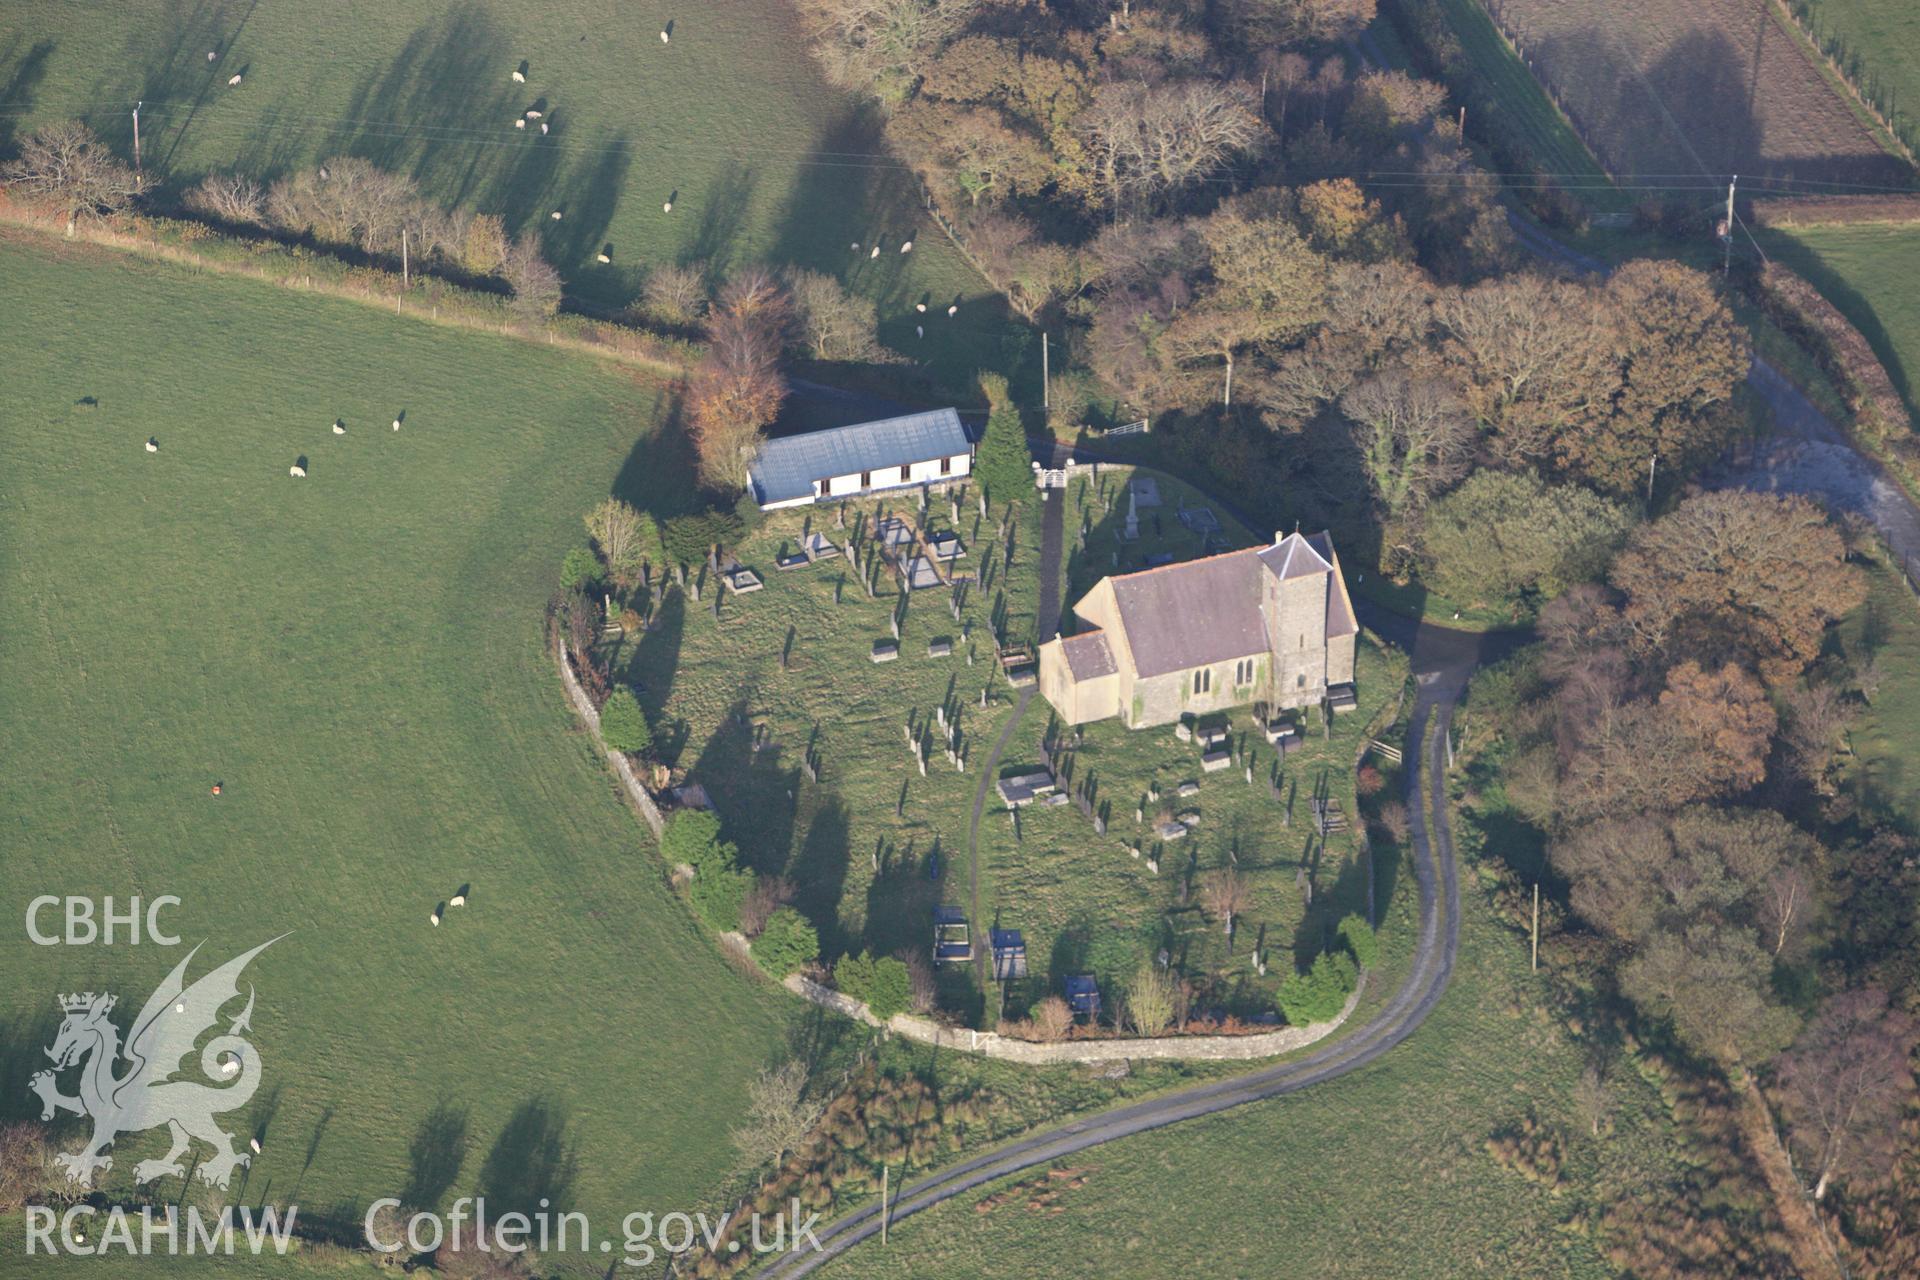 RCAHMW colour oblique aerial photograph of Gwnnws Church, Tynygraig. Taken on 09 November 2009 by Toby Driver